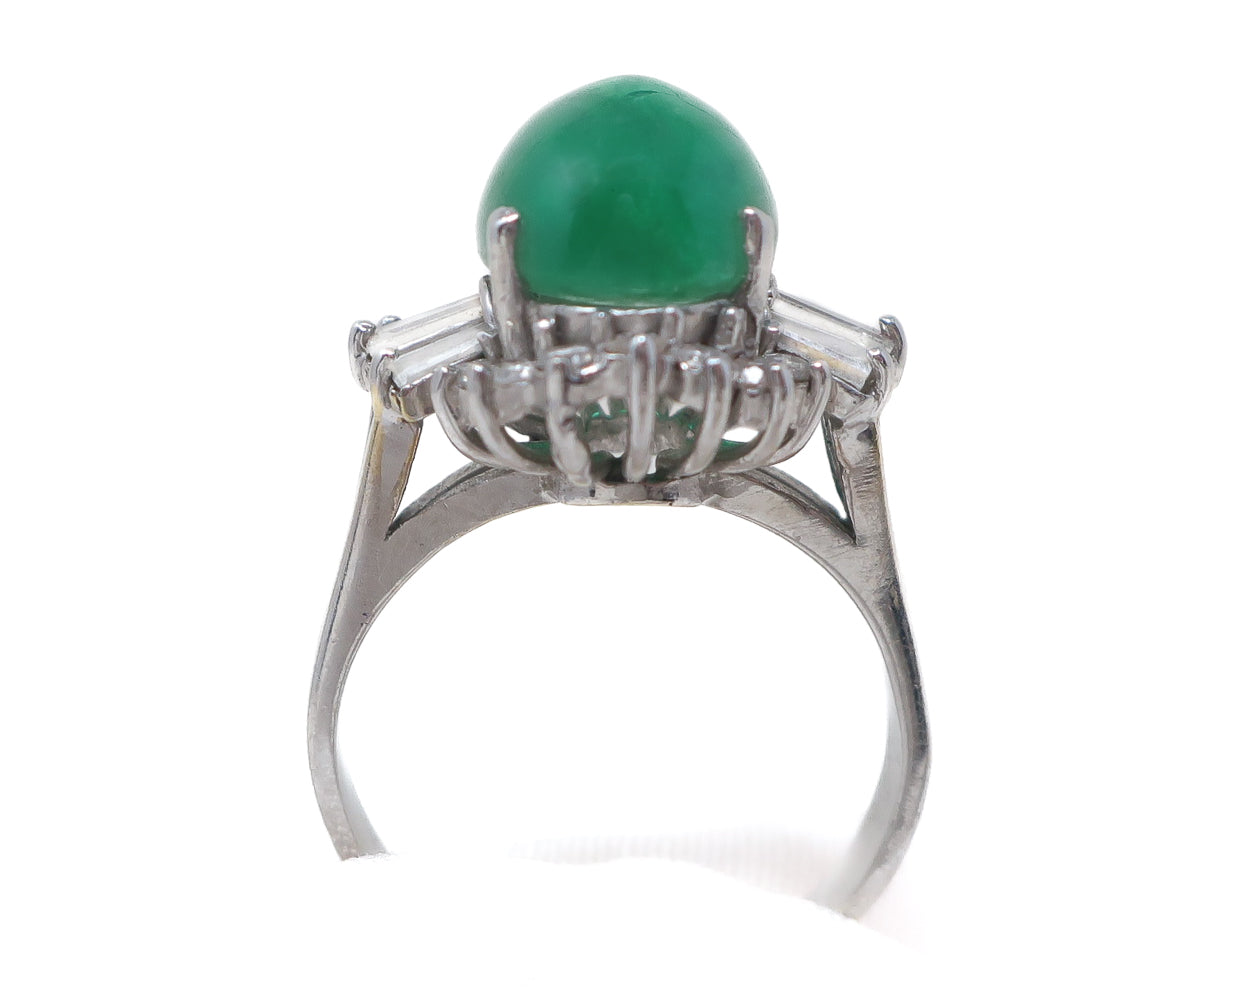 Midcentury Emerald Cabochon Ring with Diamonds